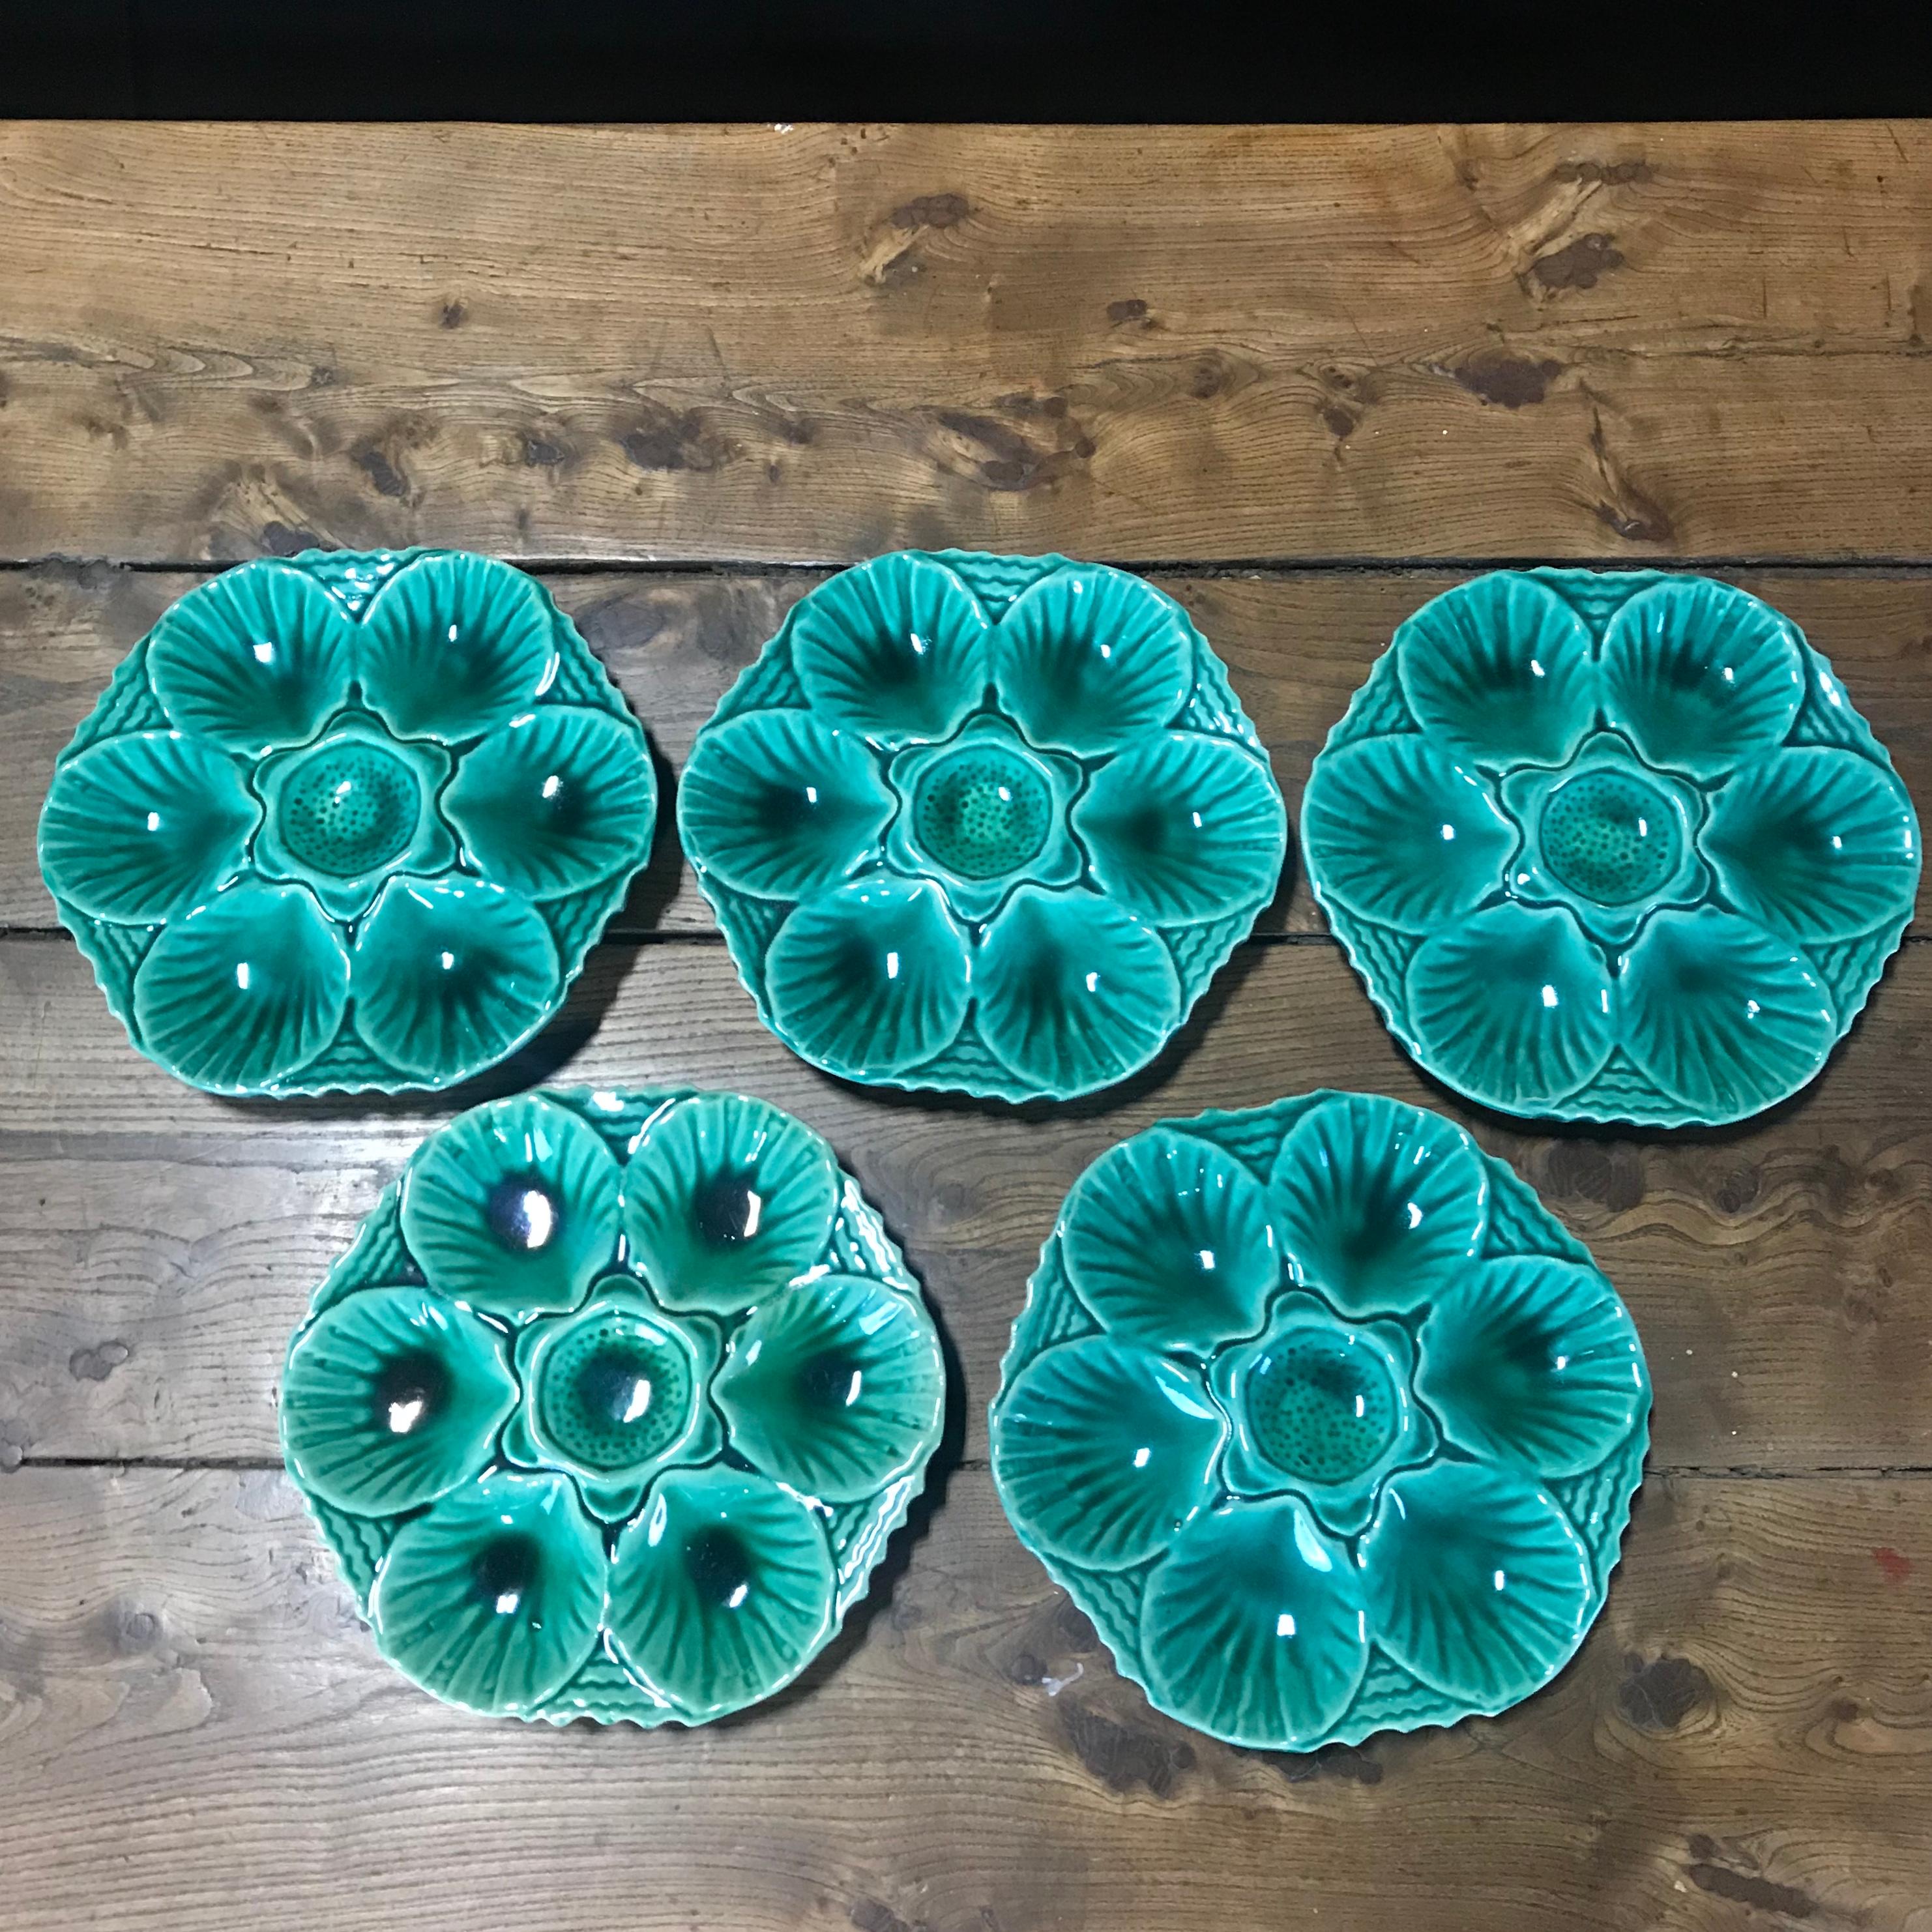 Ceramic Oyster Lovers Set of 10 Provencal French Green Plates